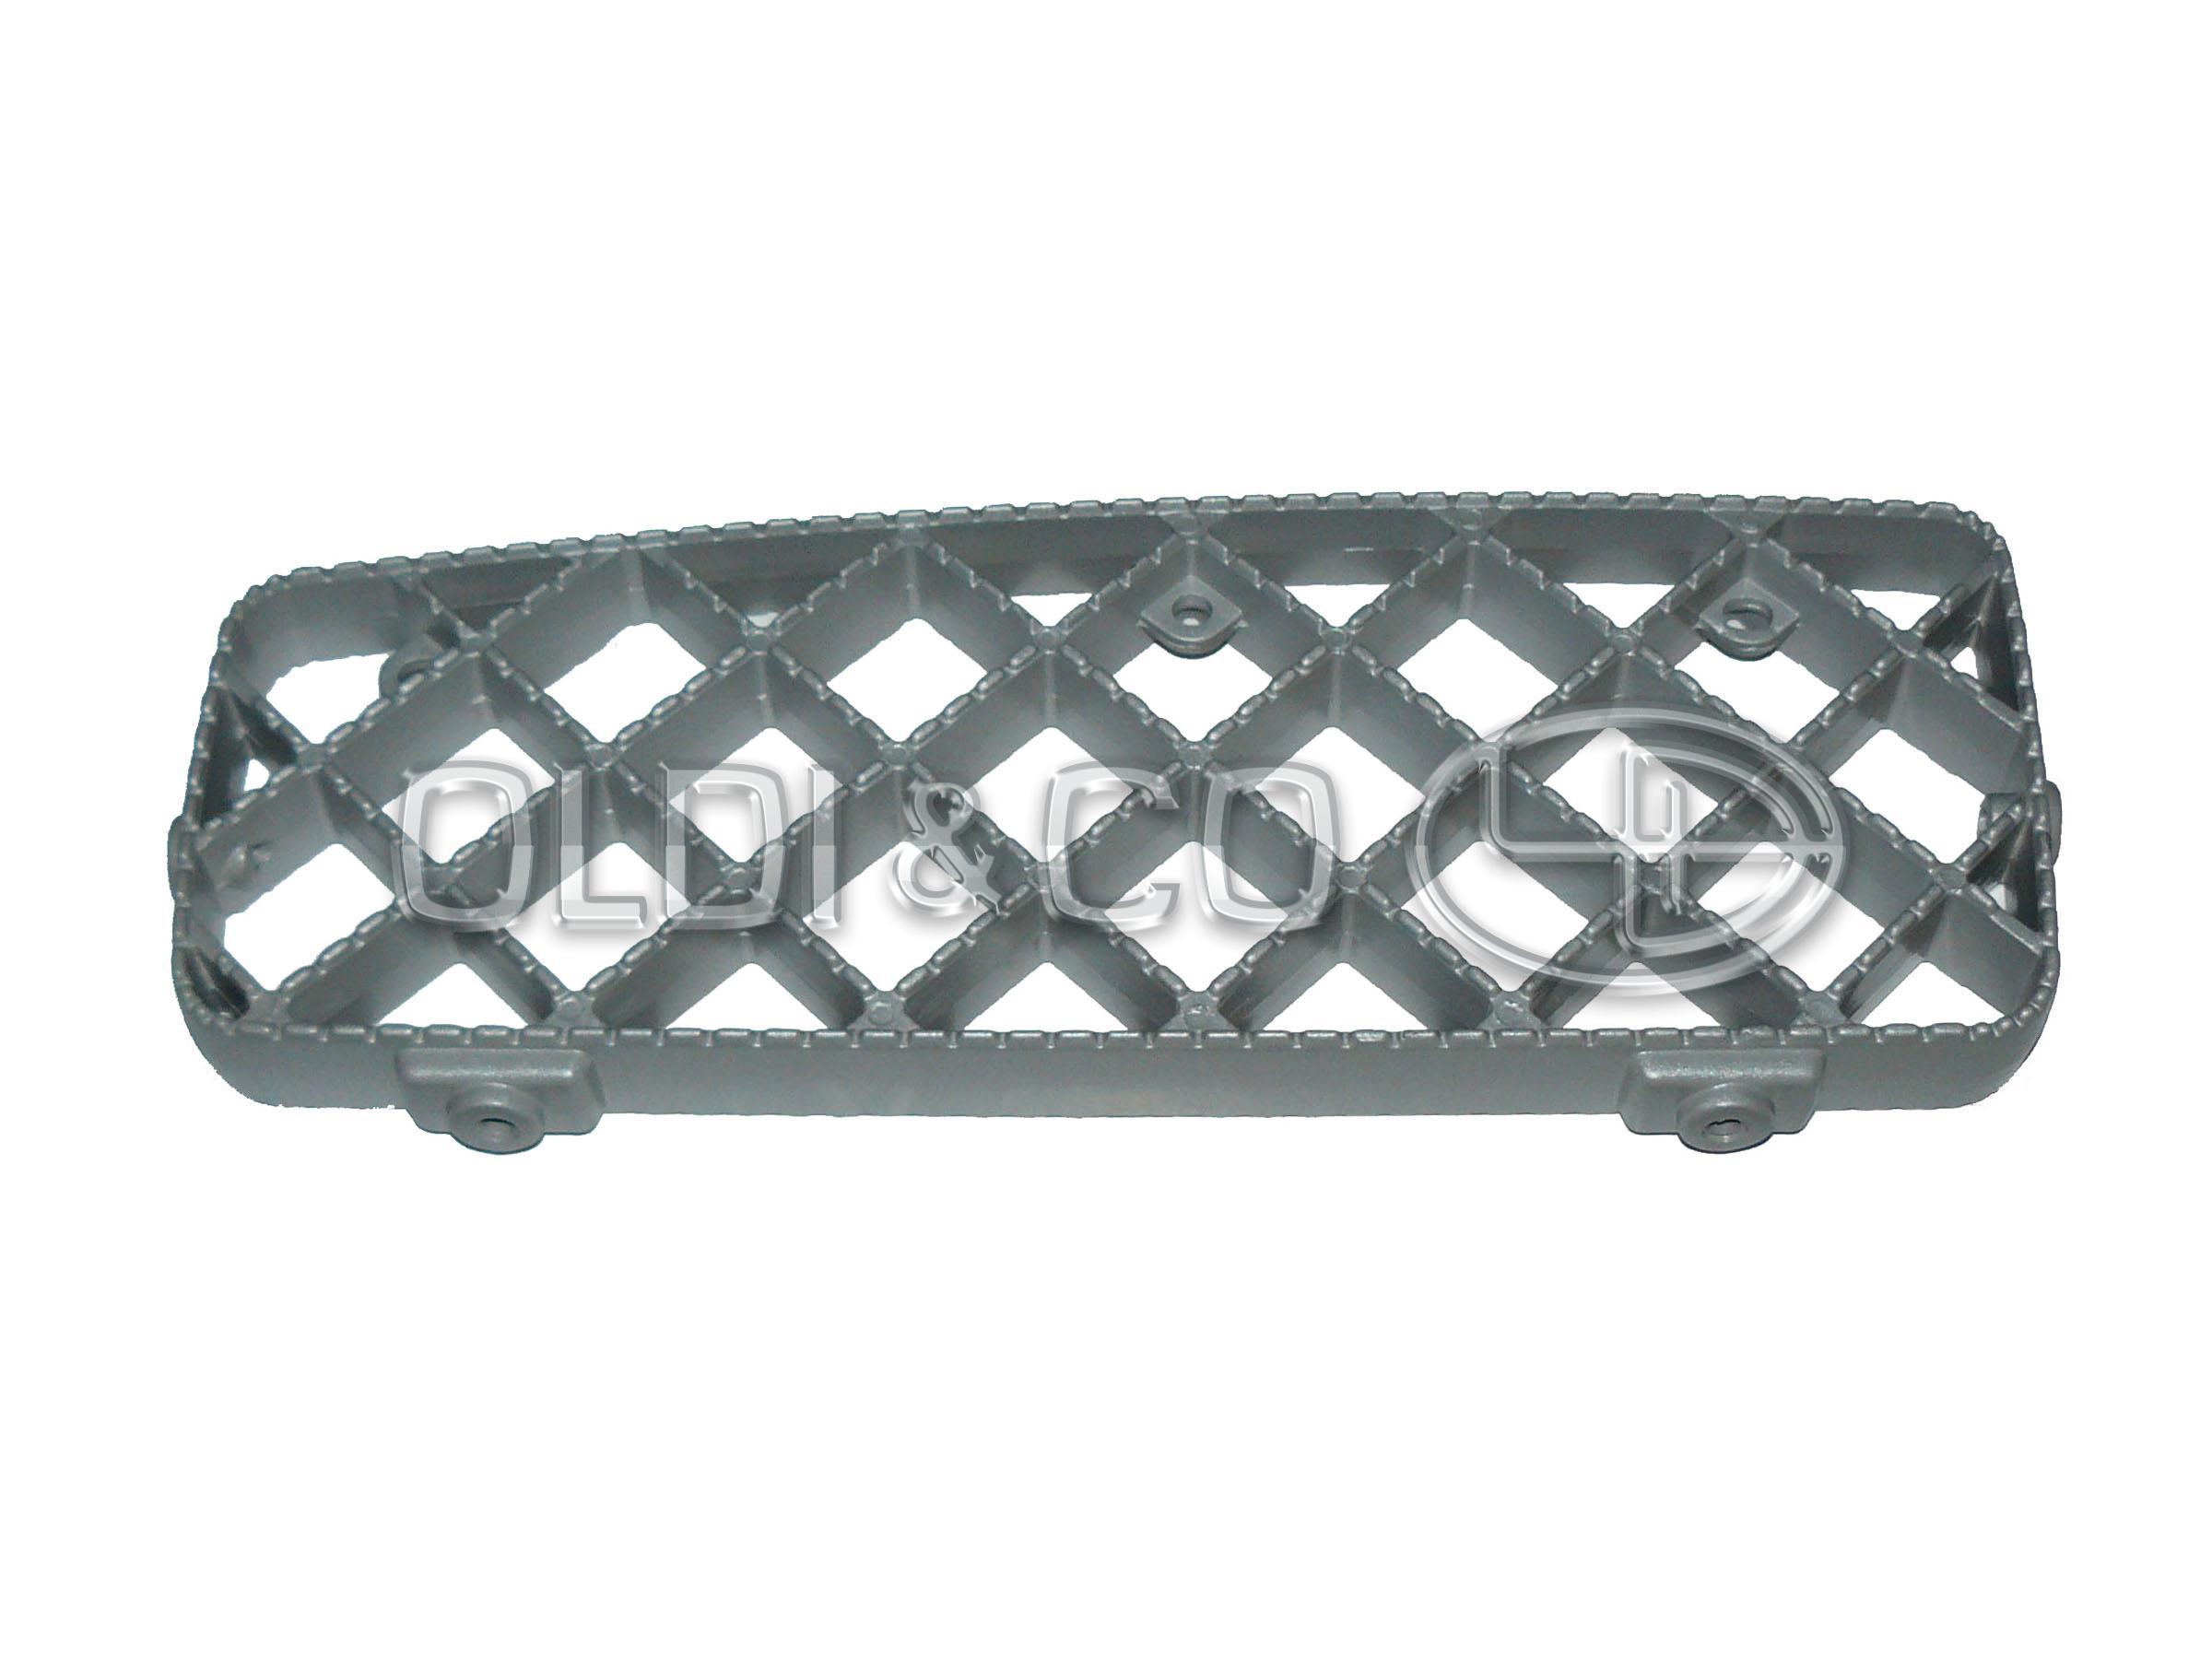 07.042.02726 Cabin parts → Footstep grille